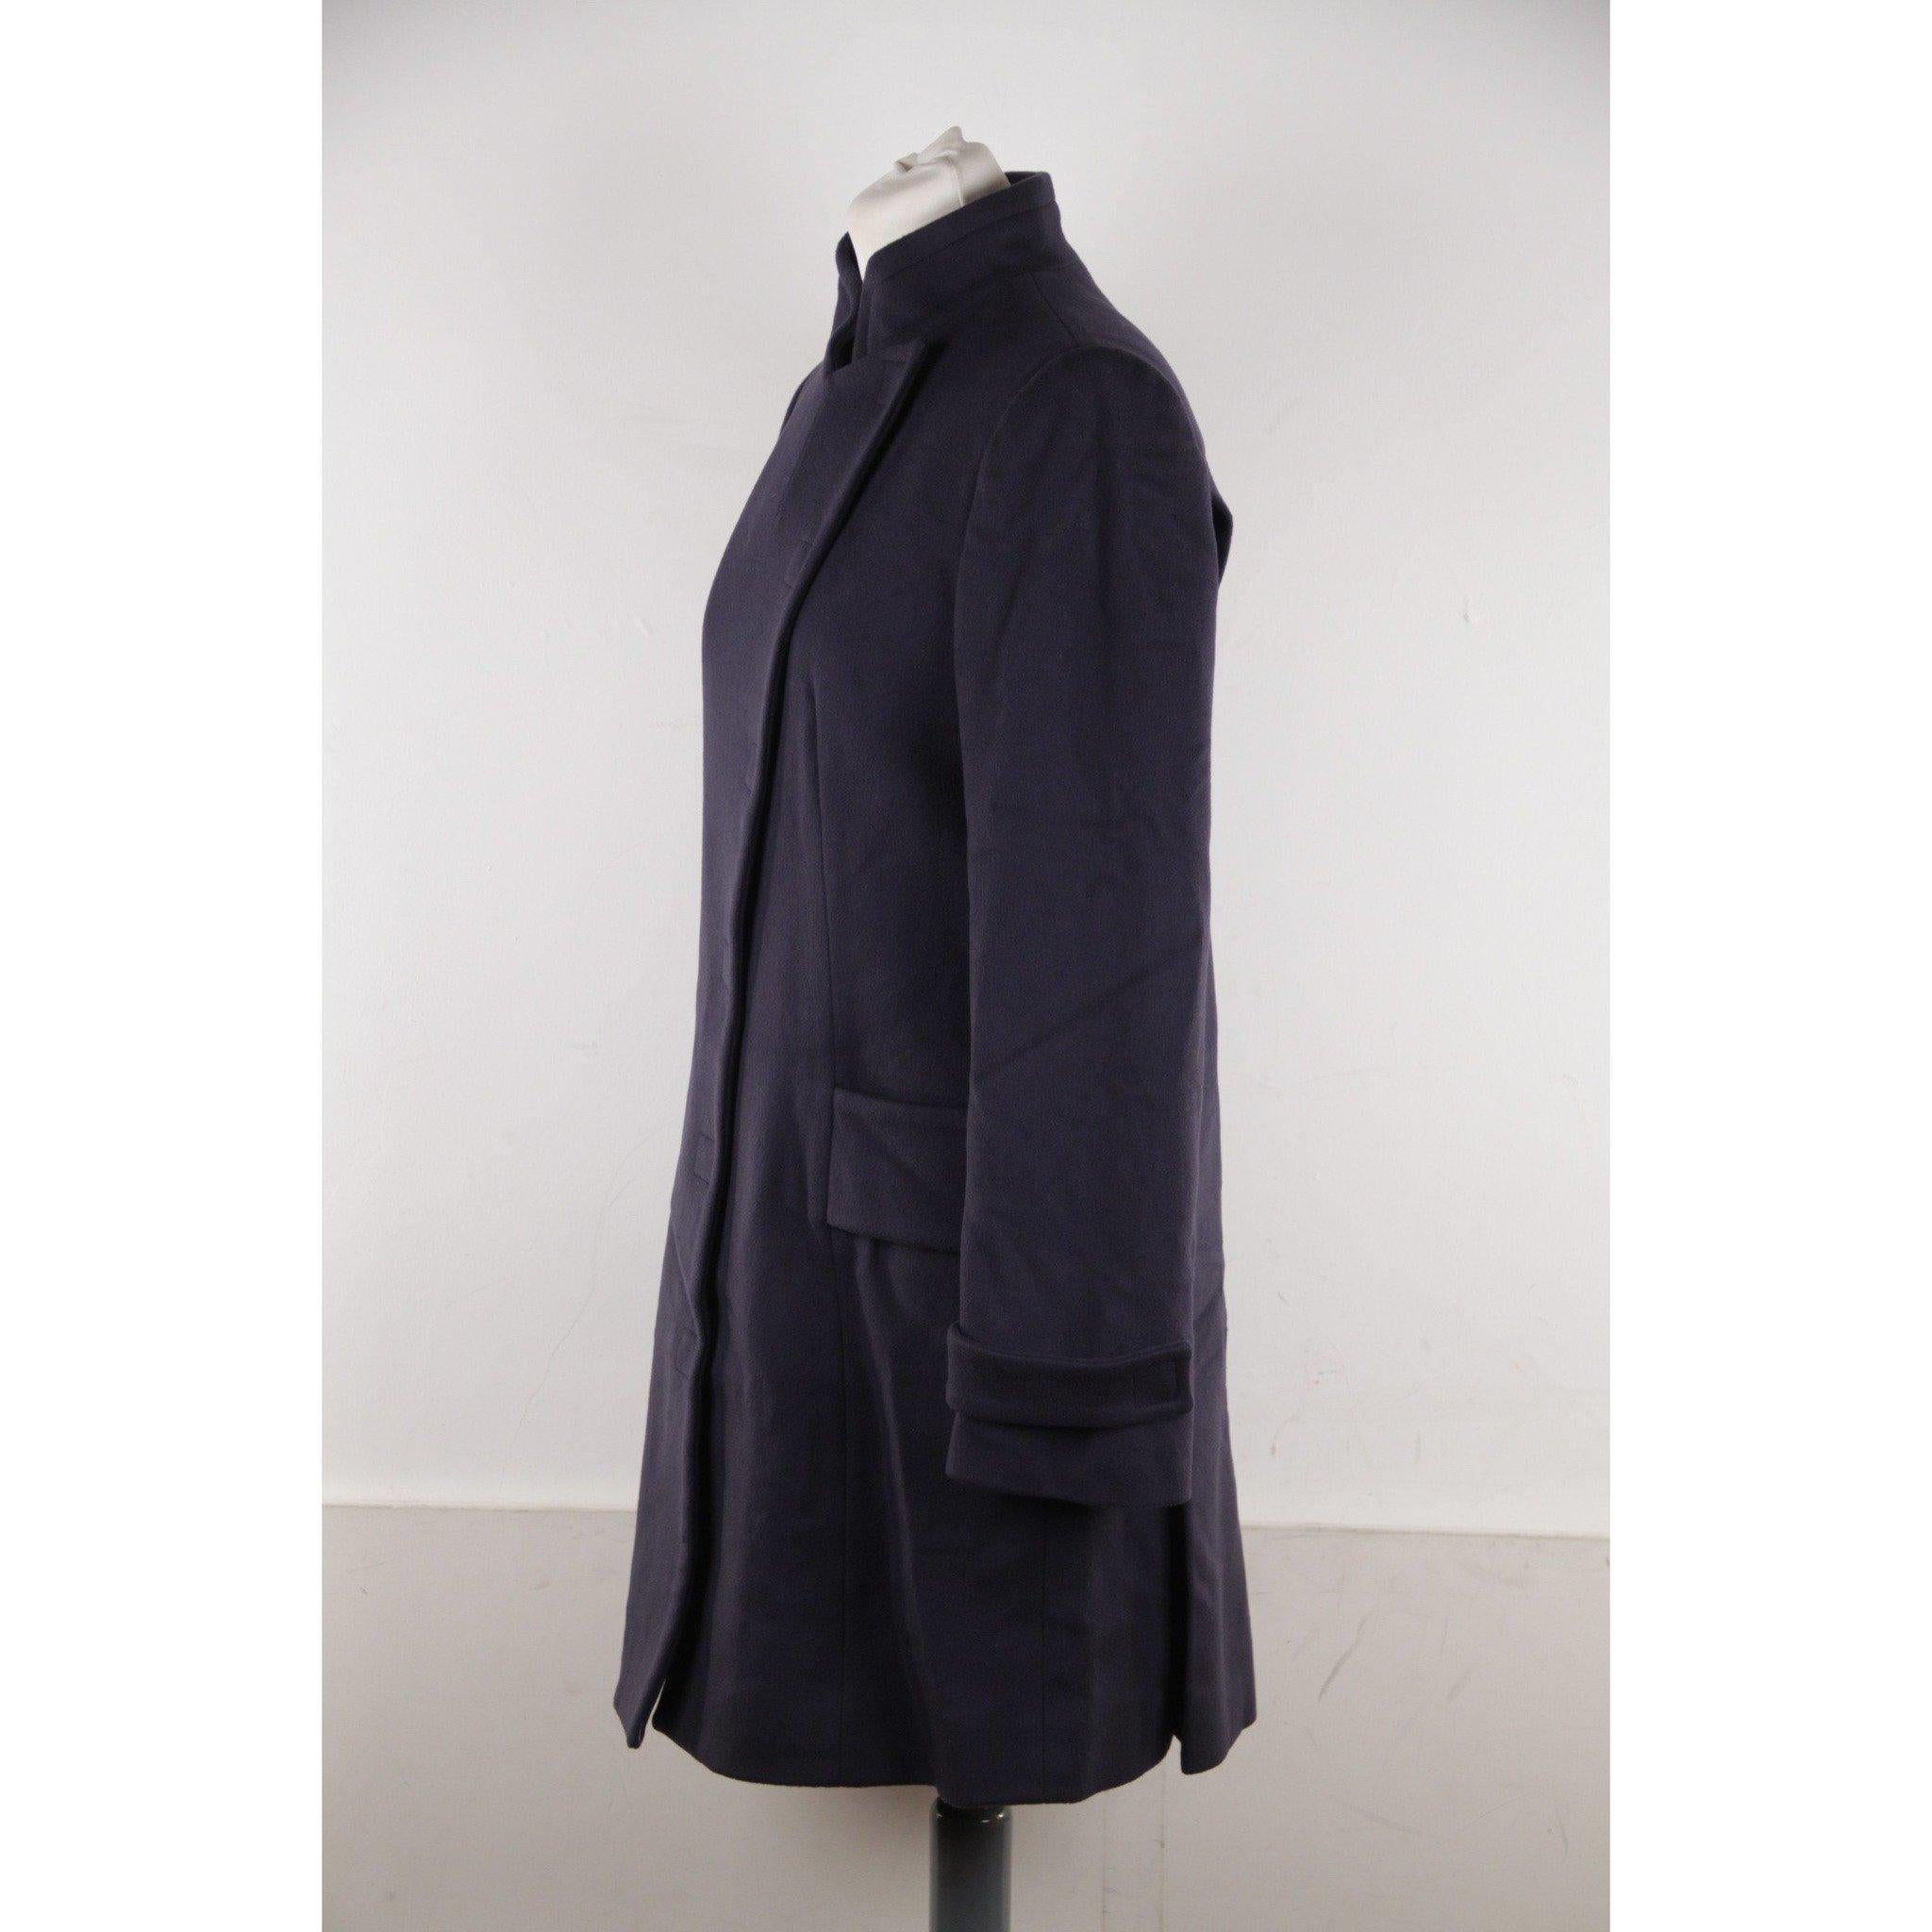 Versace Blue Wool Coat 2008 Fall Winter Collection Size 40 IT In Excellent Condition In Rome, Rome